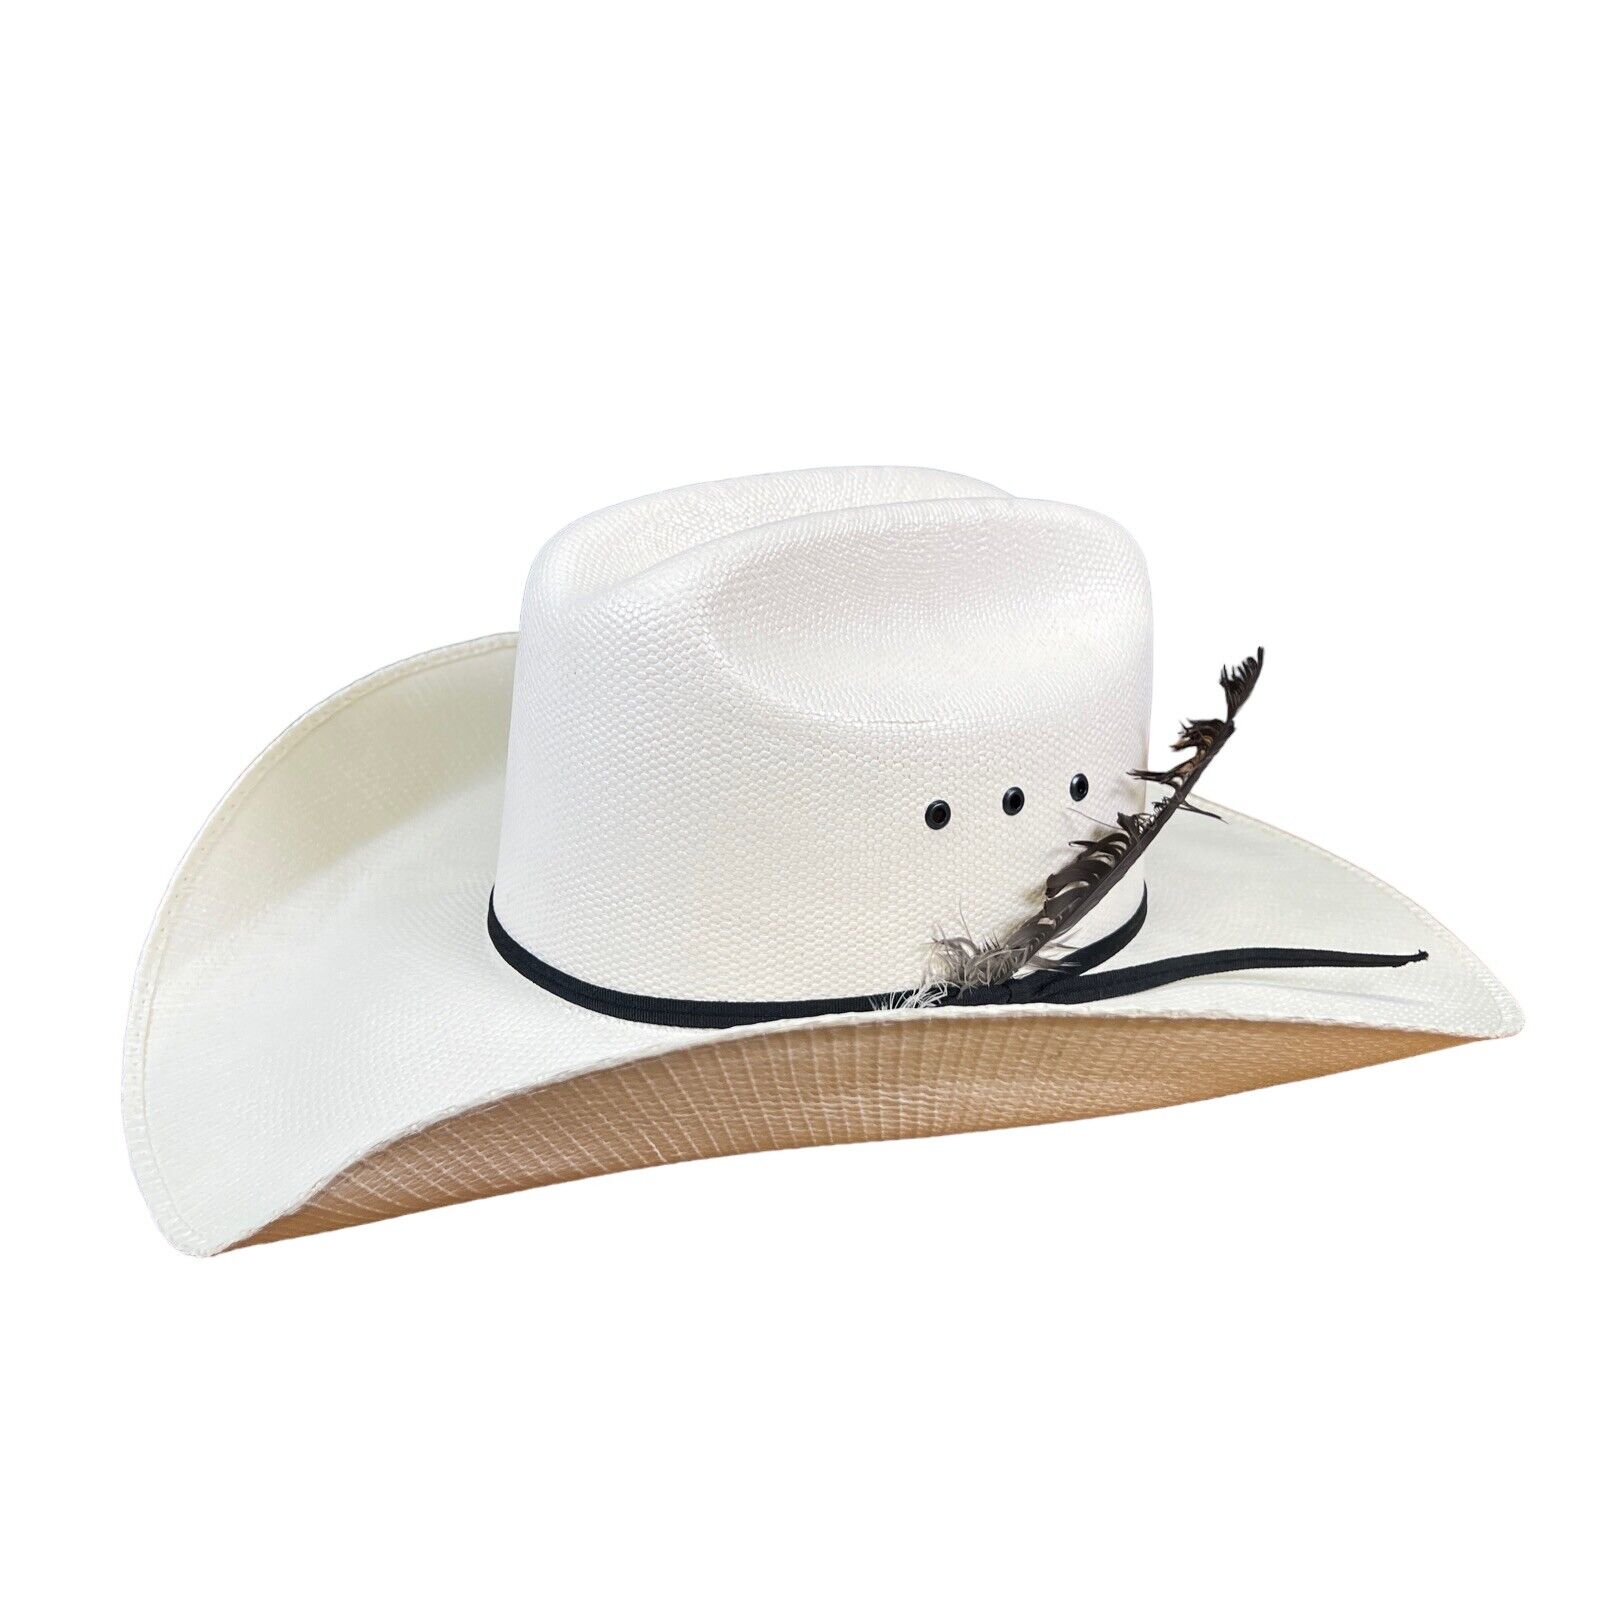 Cody james hats: Elevating Western Style with Timeless缩略图